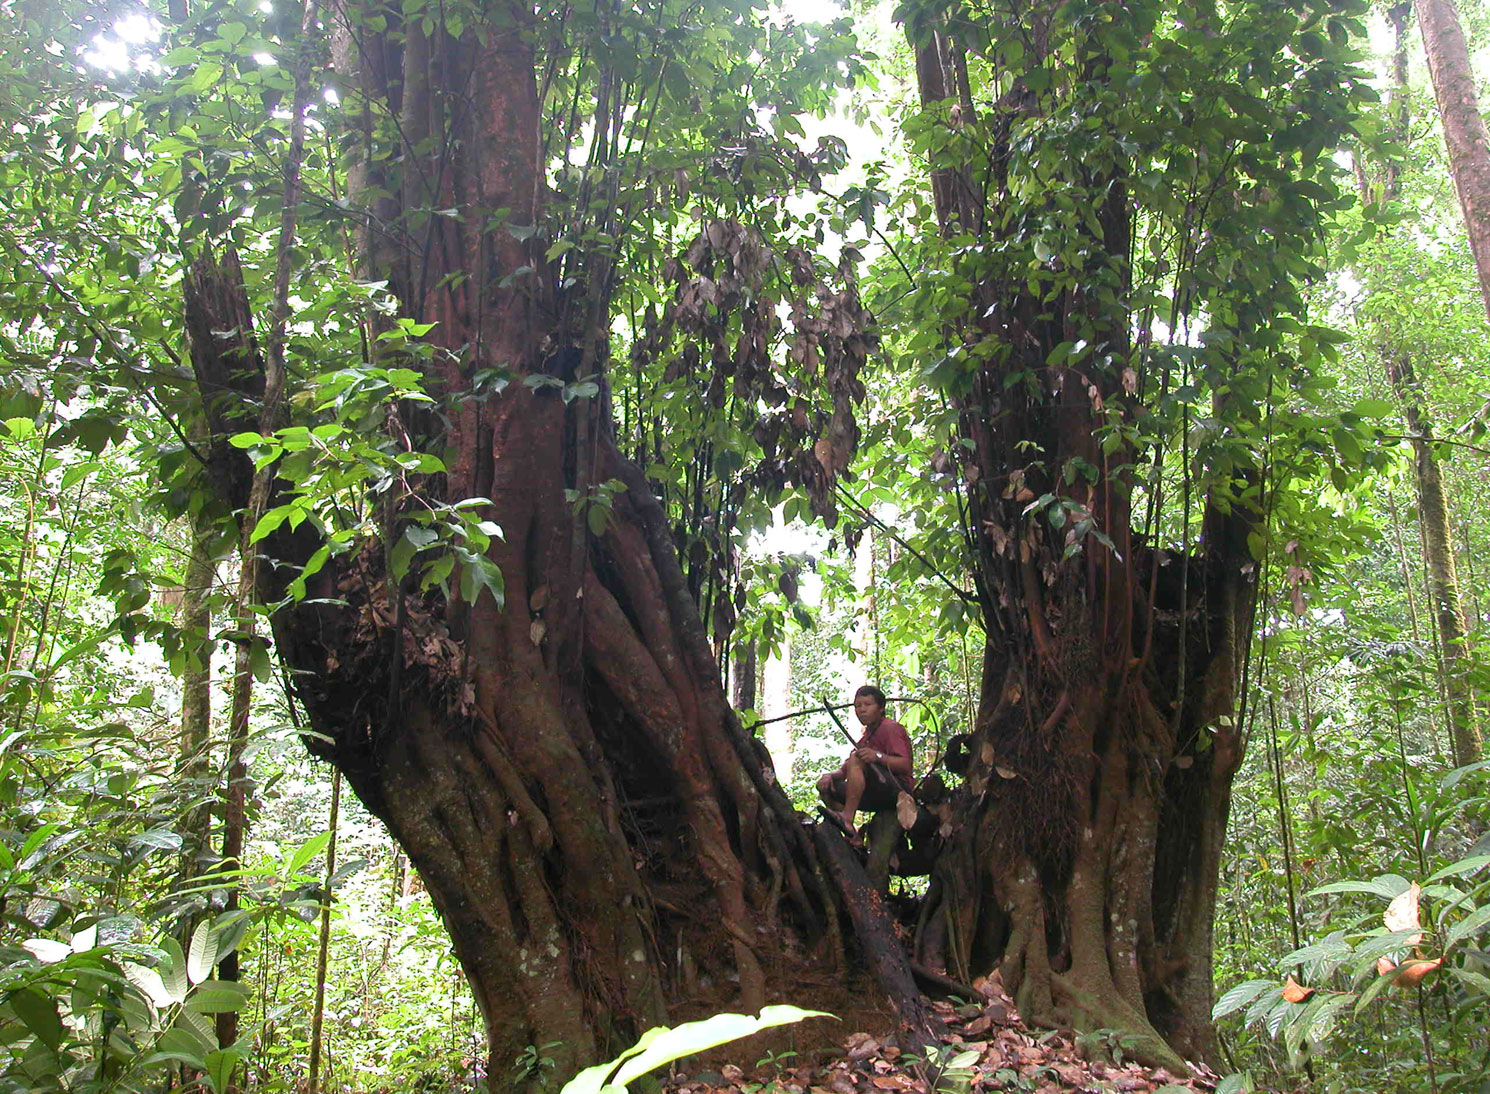 A very large Dicymbe corymbosa tree in a forest. There are two thick trunks with a person sat in the middle 